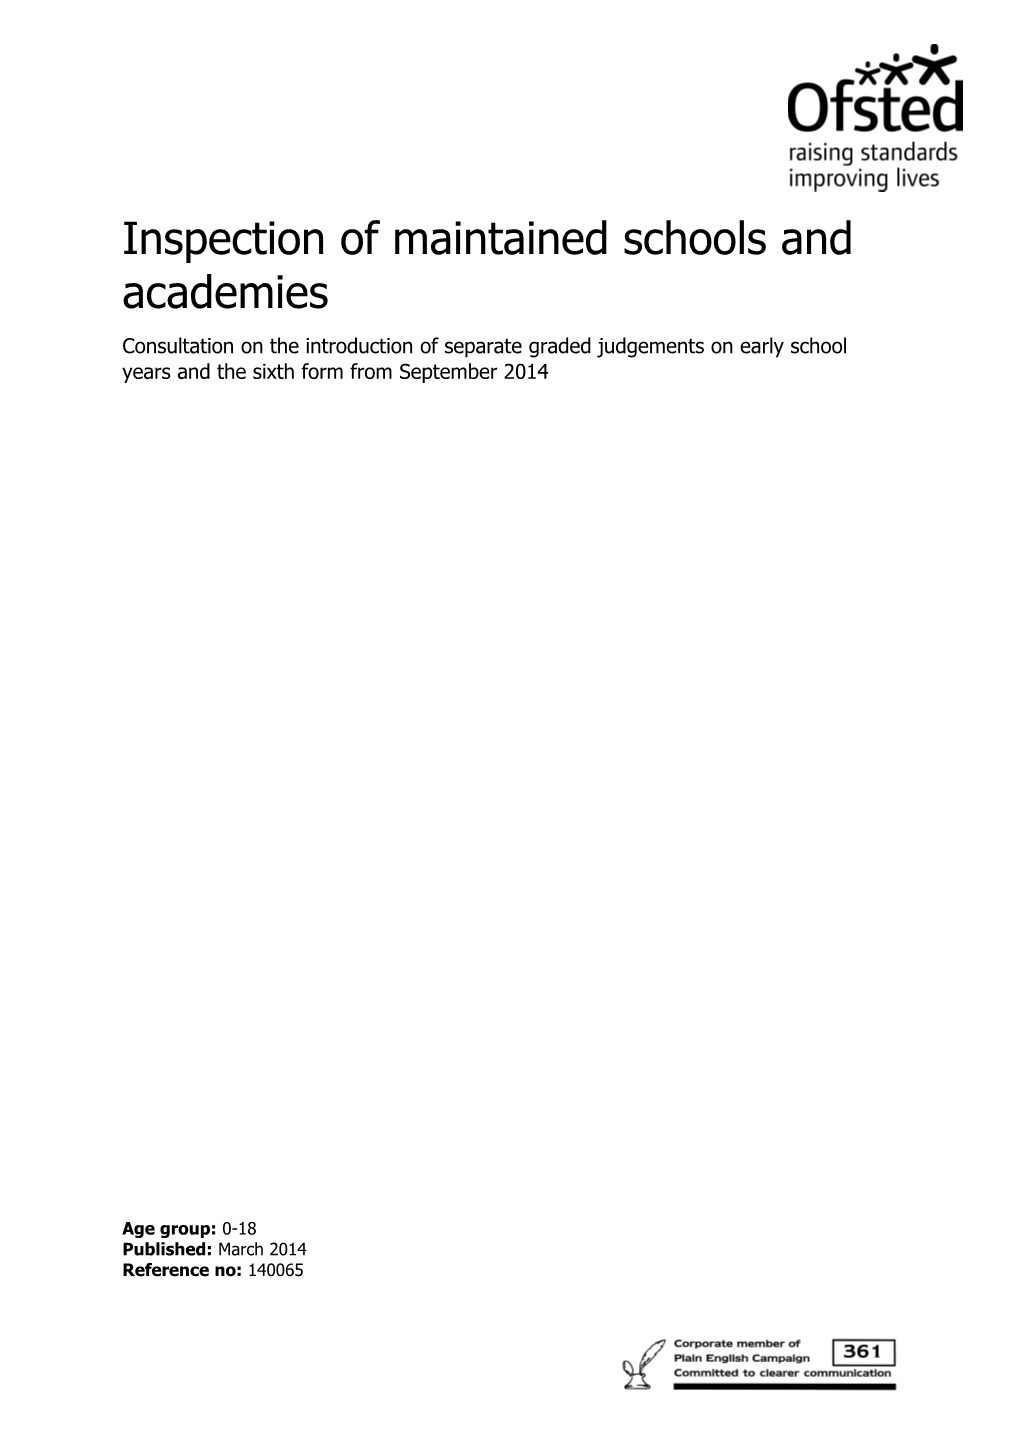 Inspection of Maintained Schools and Academies